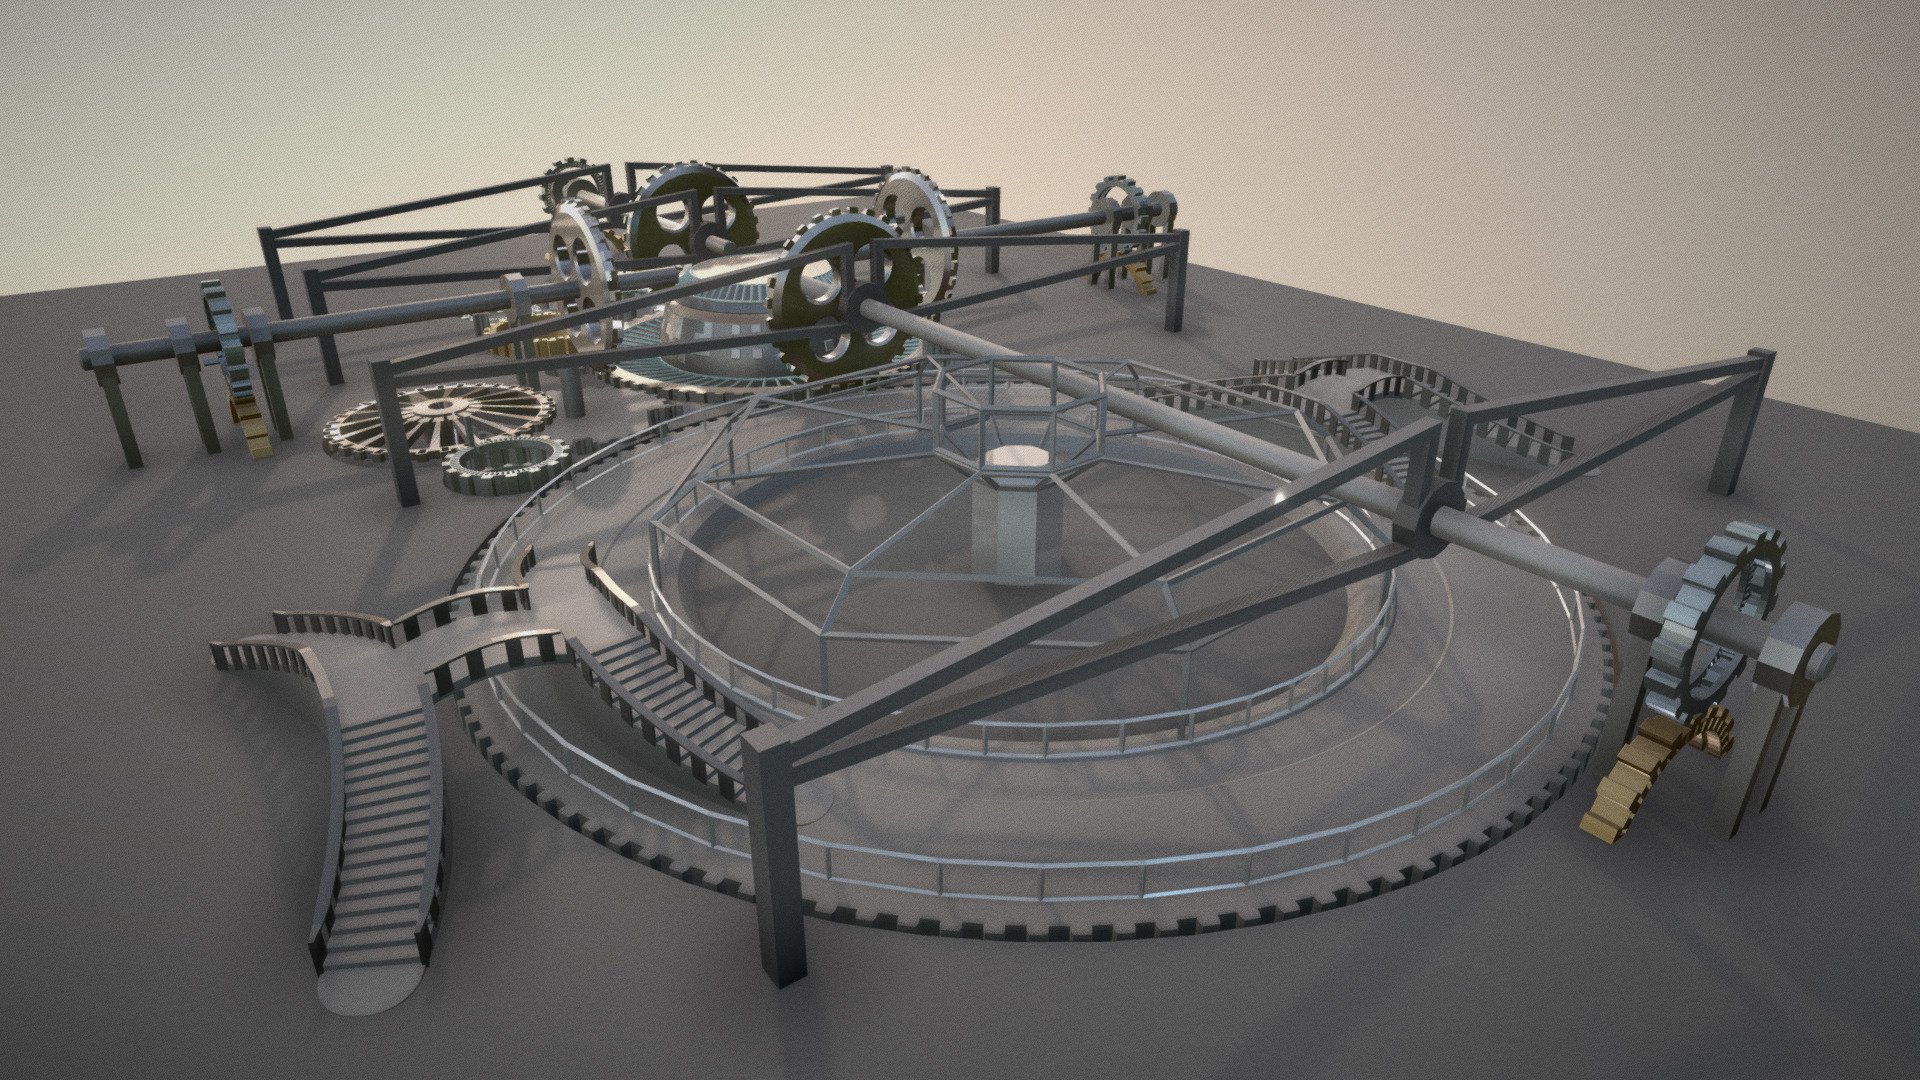 Here's a little project I'm working on in my free time.

I'm trying to create a mechanical city powered by water, wind, sun and geothermal energy 3d model